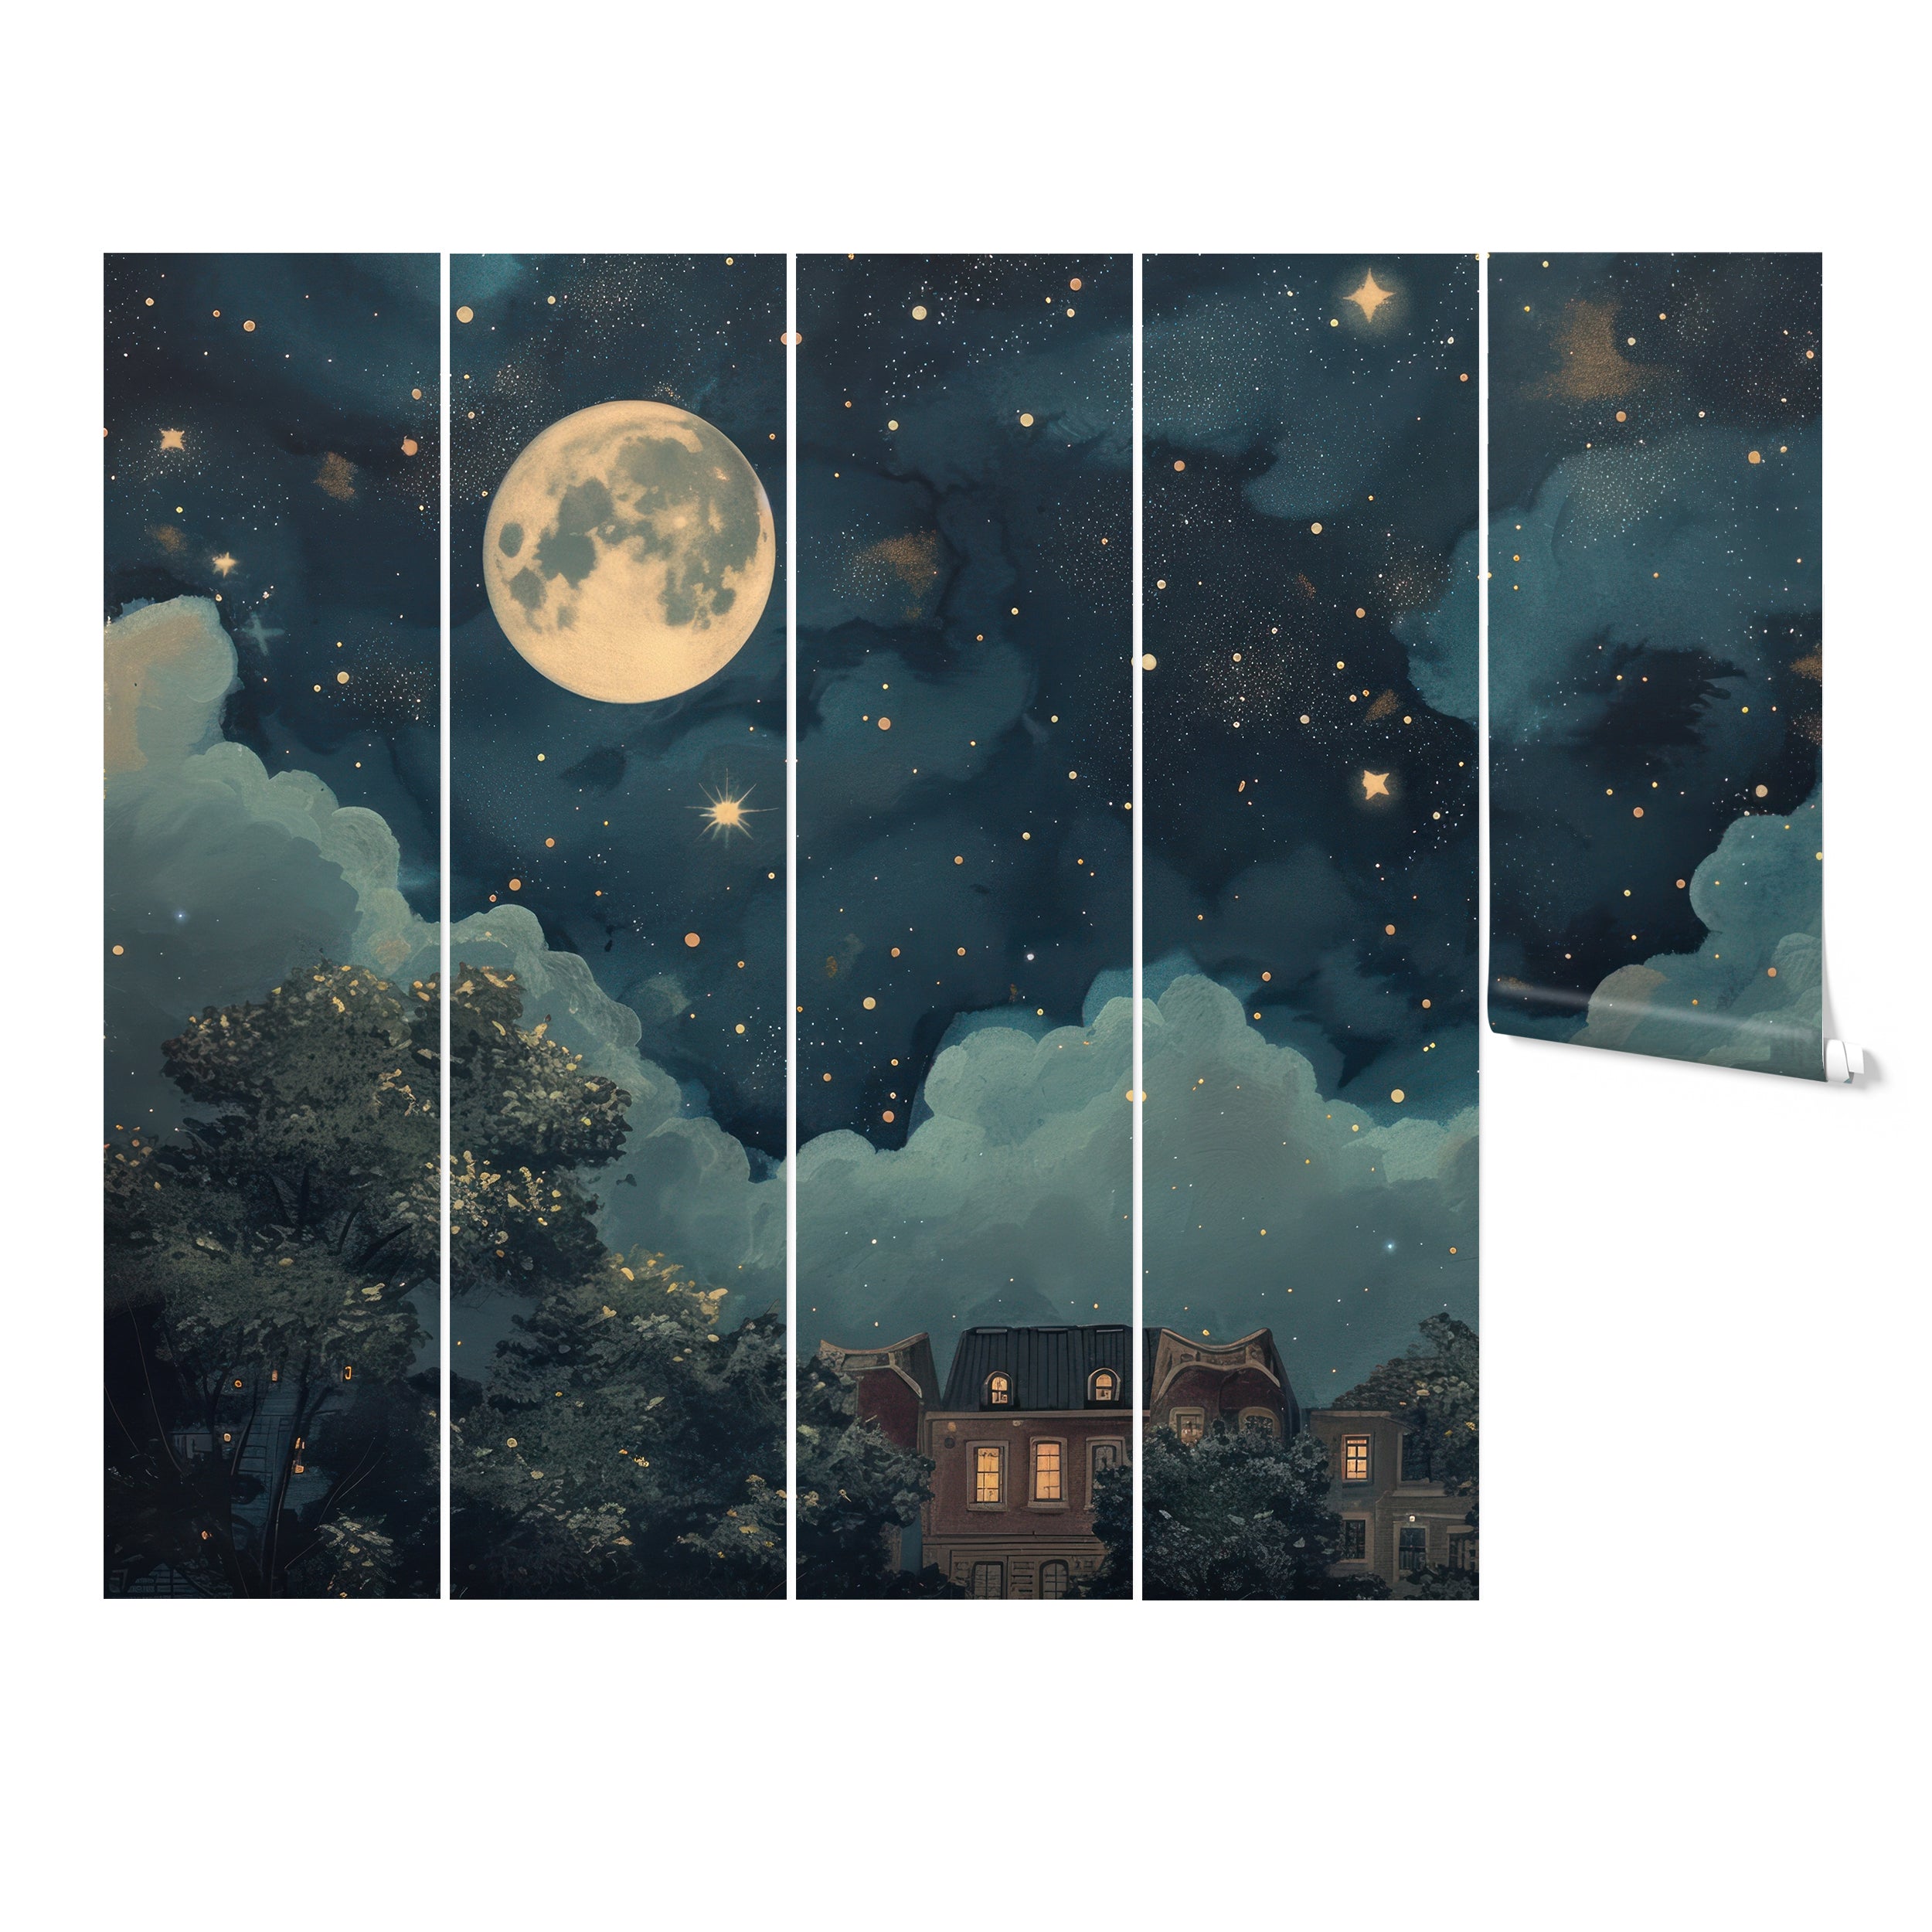 Rolled wallpaper panels of the 'Nighttime in Paris' mural ready for installation, displaying a night sky over Paris with stars and clouds.